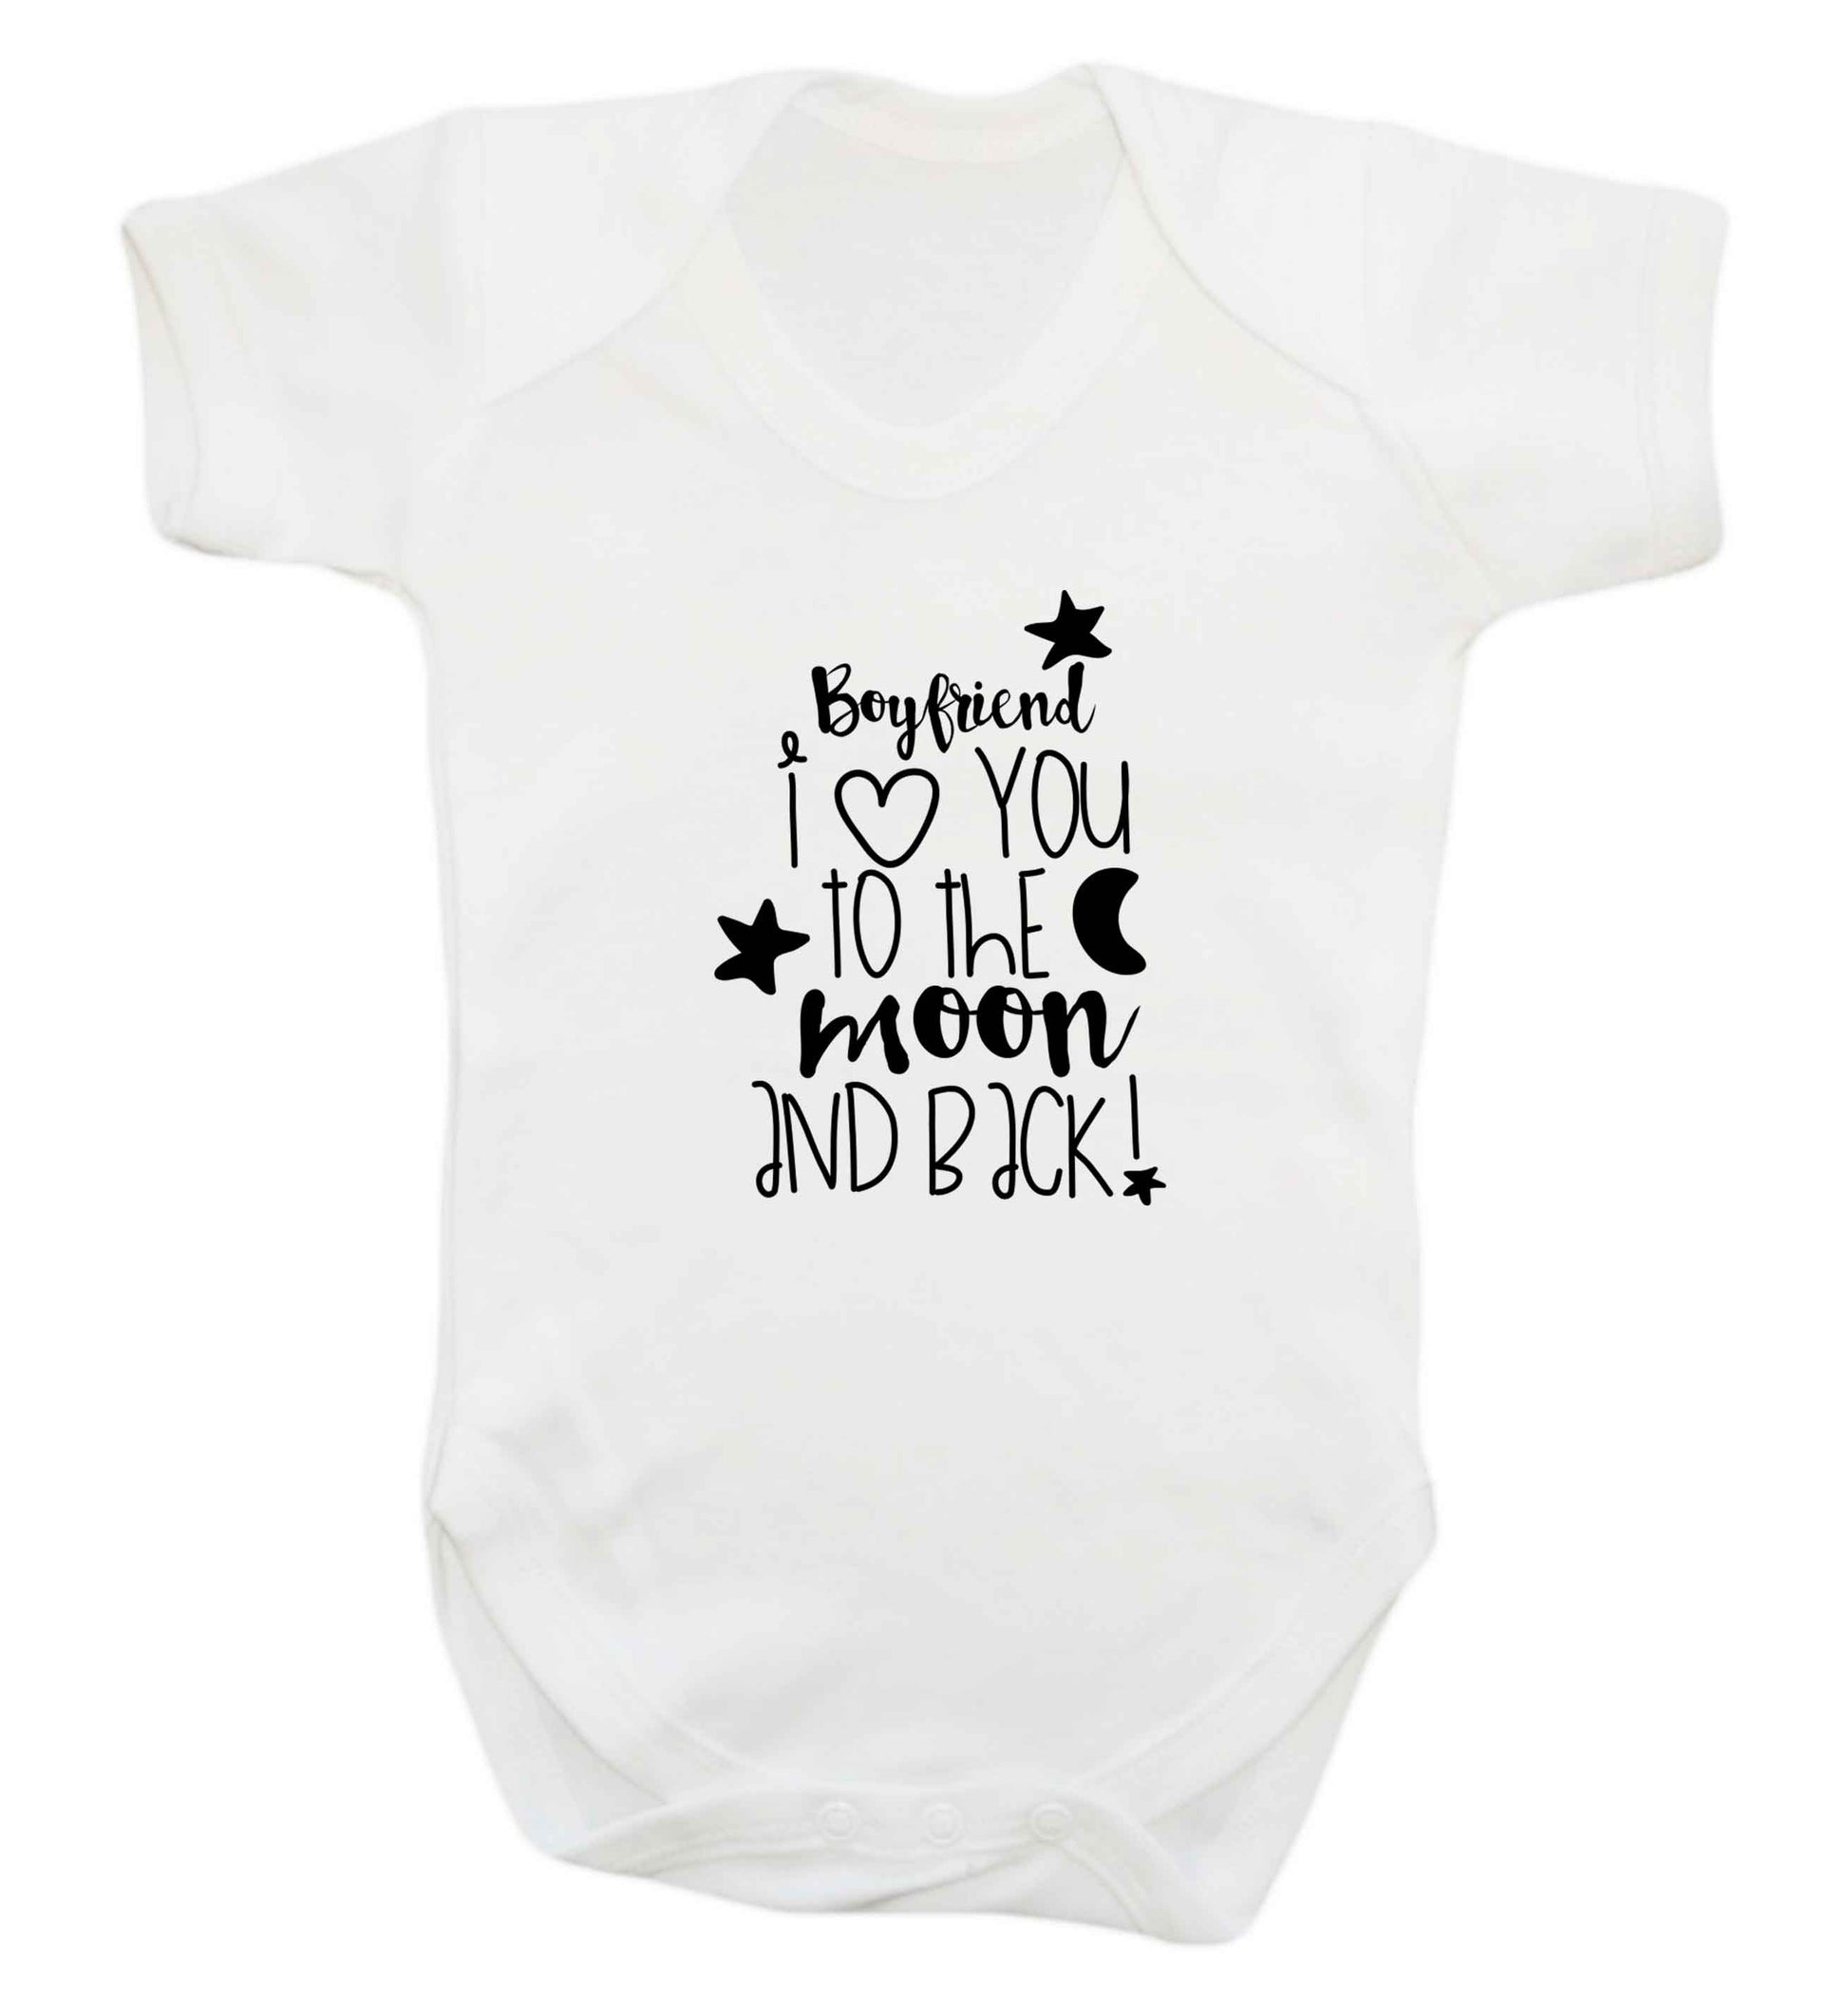 Boyfriend I love you to the moon and back baby vest white 18-24 months